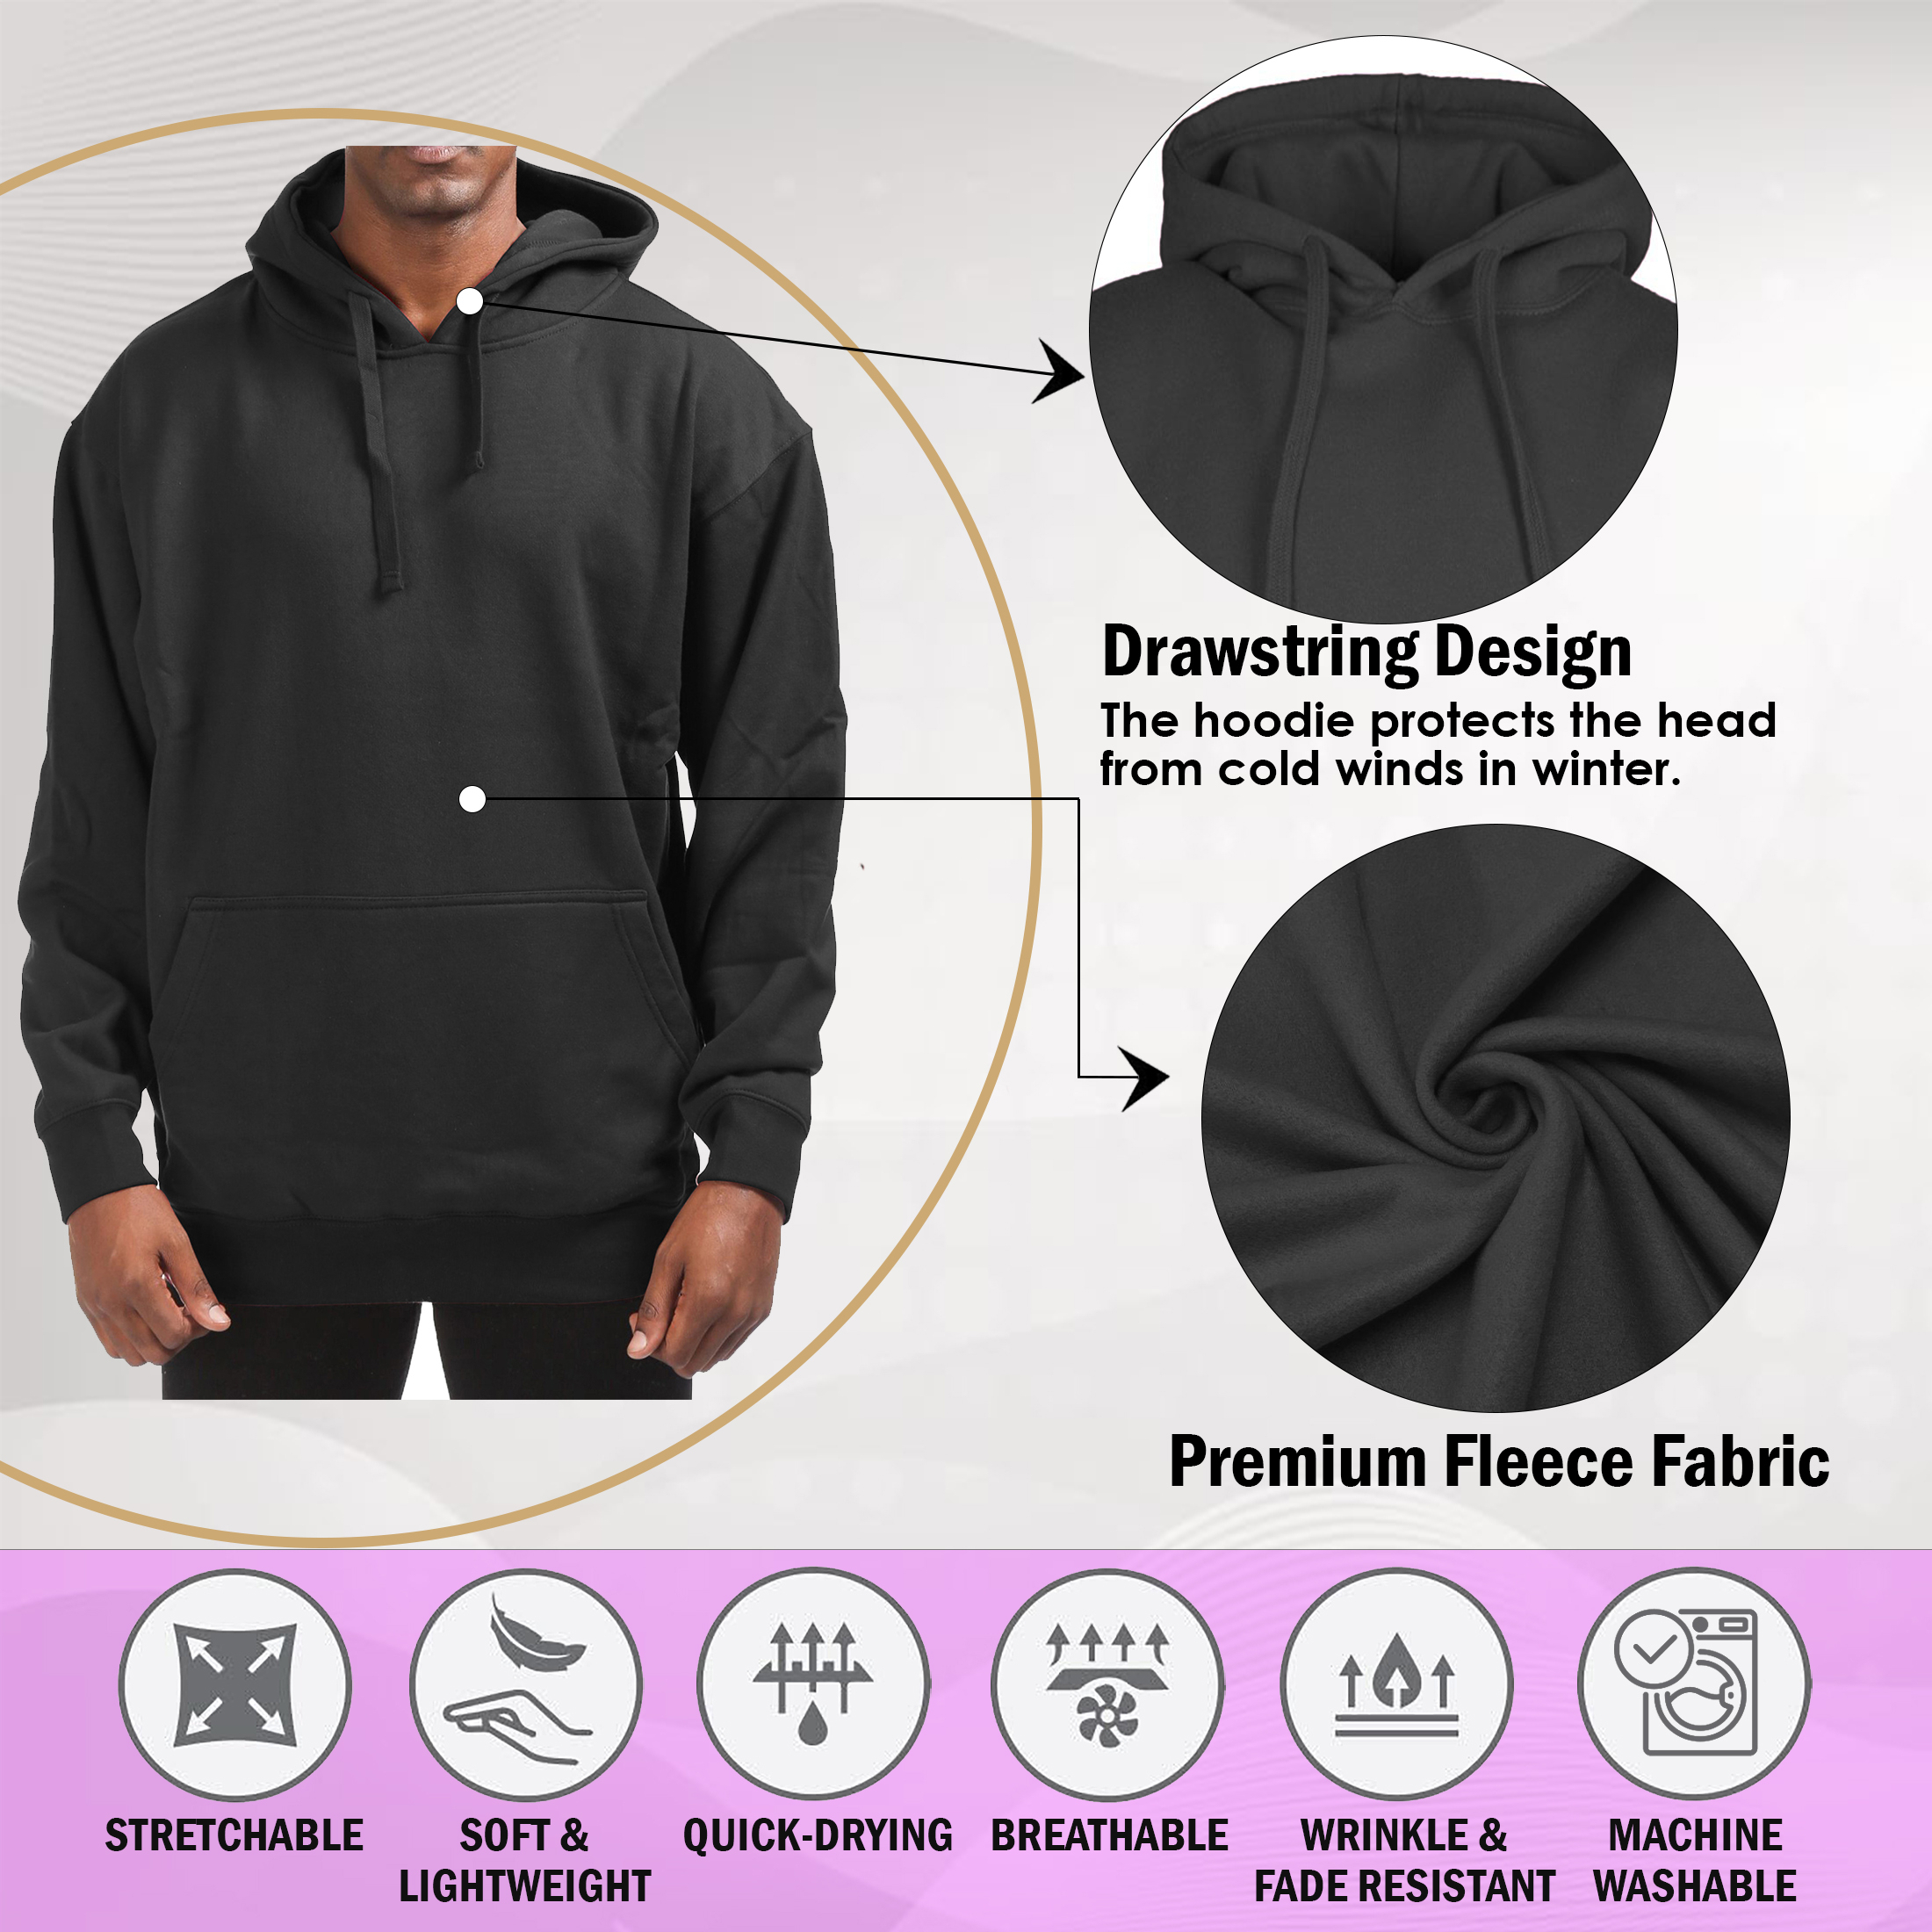 Men's Cotton-Blend Fleece Pullover Hoodie With Pocket (Big & Tall Sizes Available) - Charcoal, Medium